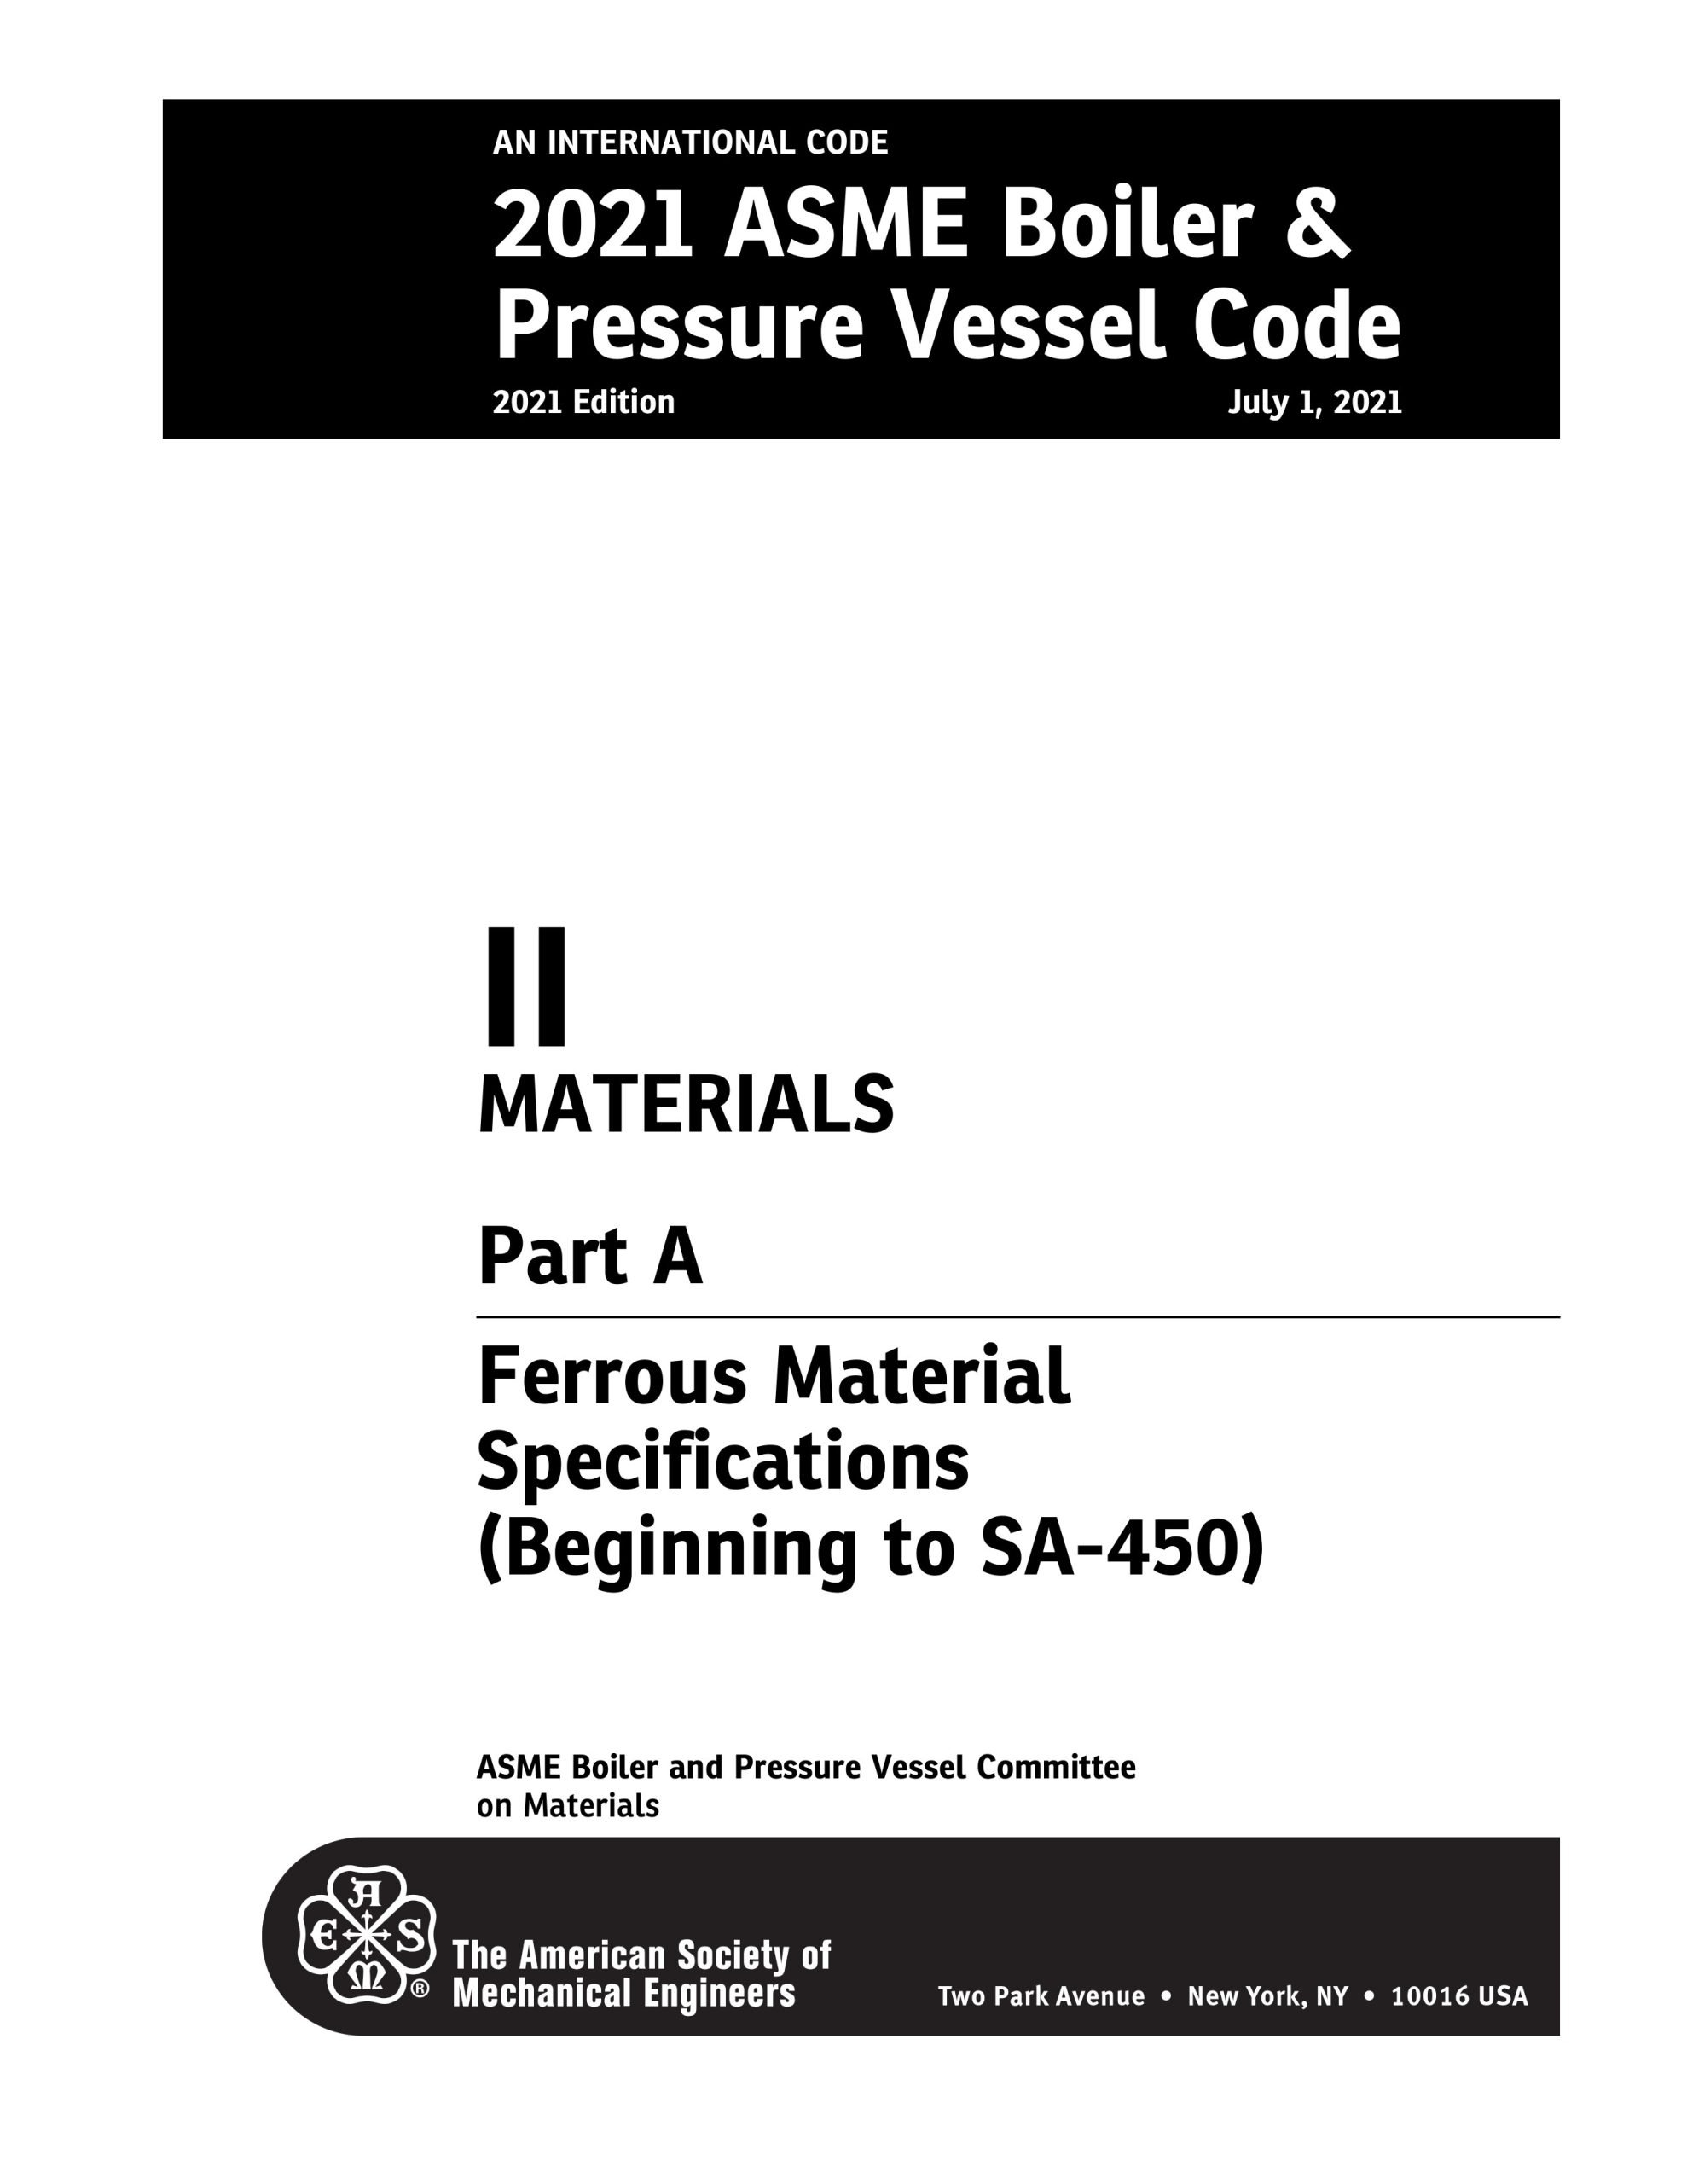 ASME BPVC.II.A-2021 ASME Boiler and Pressure Vessel Code, Section II: Materials – Part A: Ferrous Material Specifications